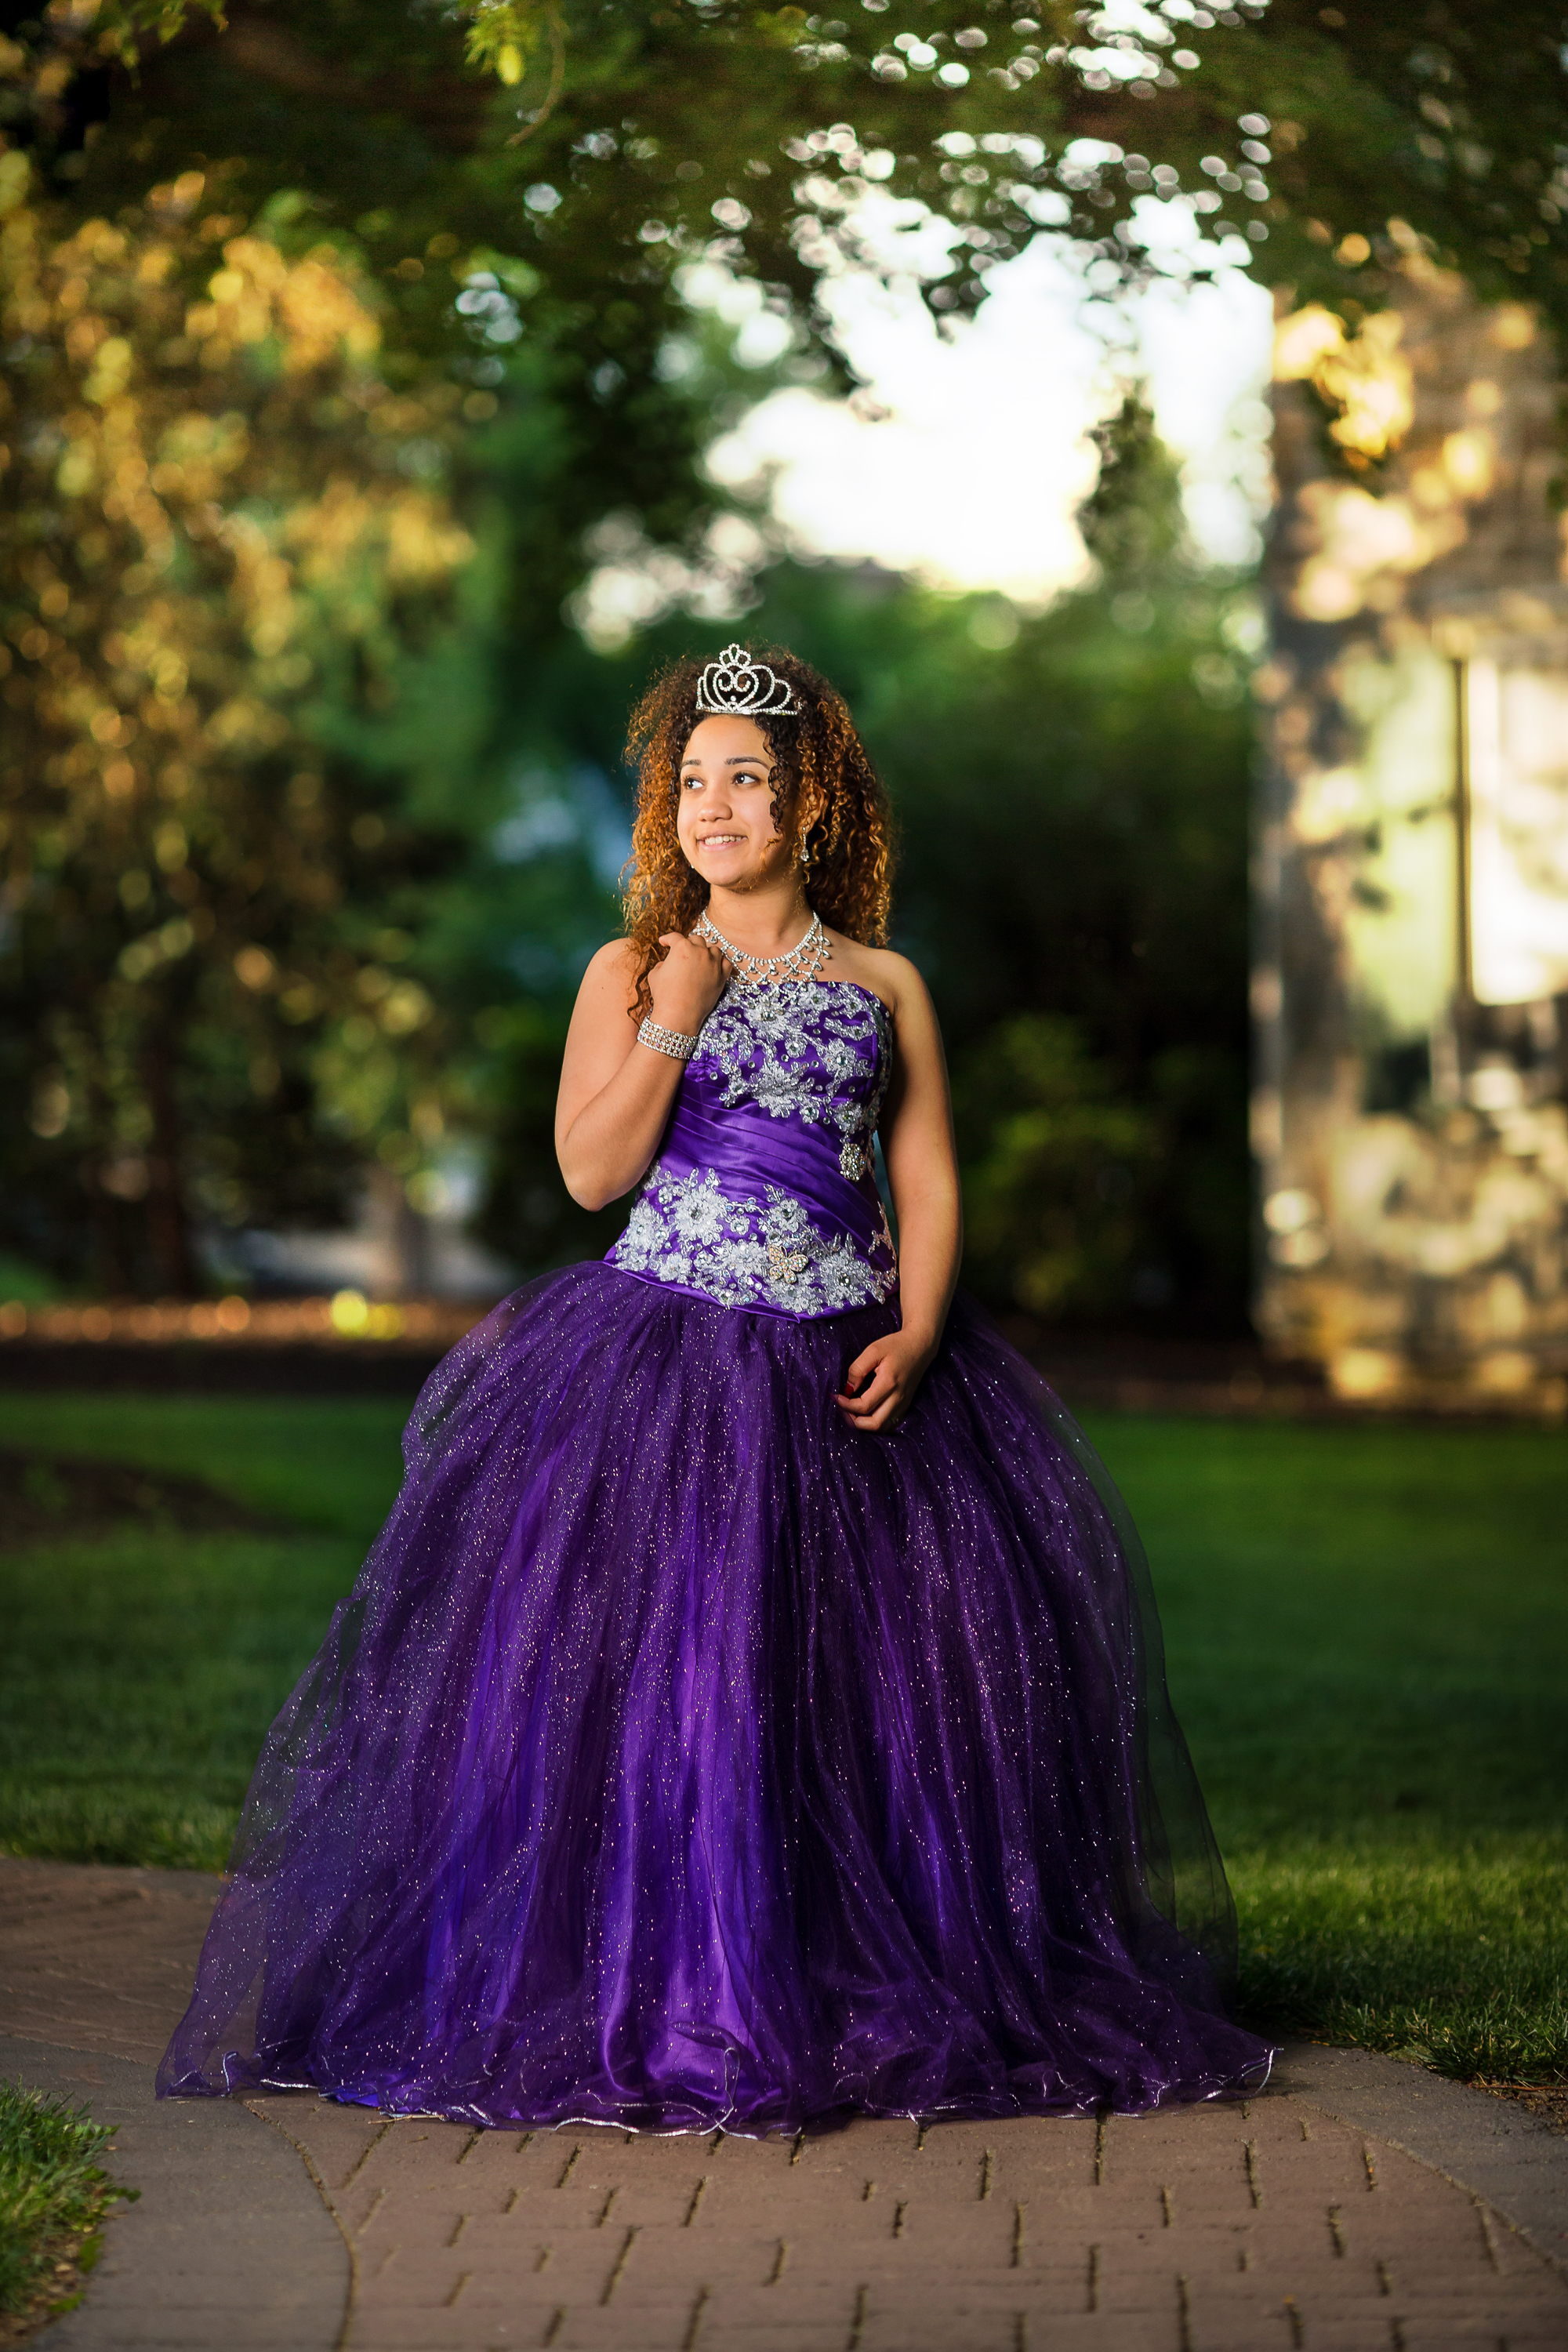 Natalias-Quince-Session-Garcia-Photography-2164.jpg